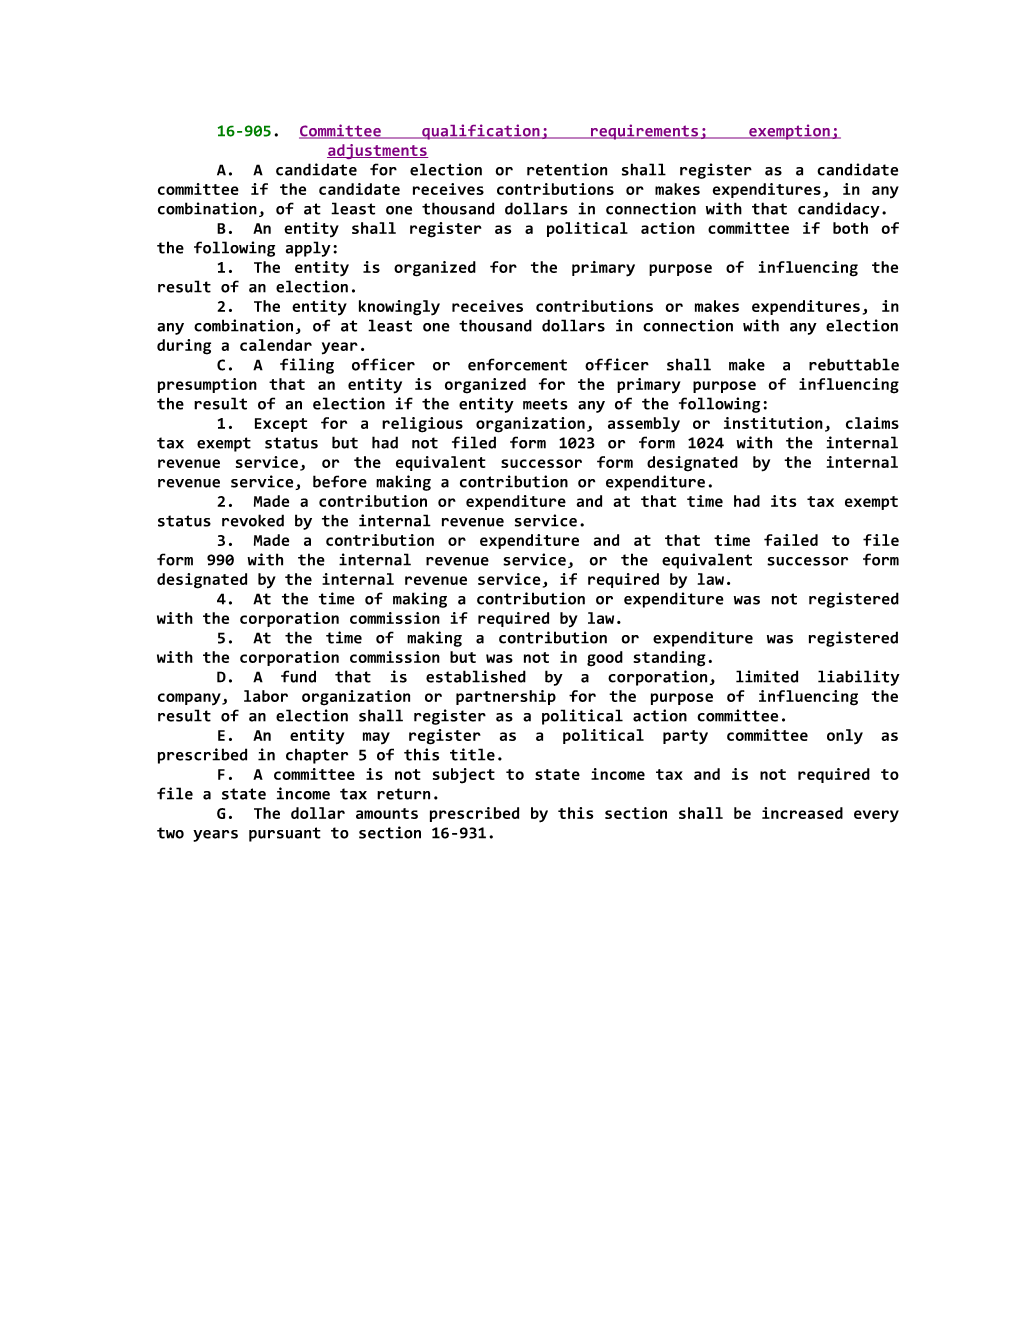 16-905; Committee Qualification; Requirements; Exemption; Adjustments